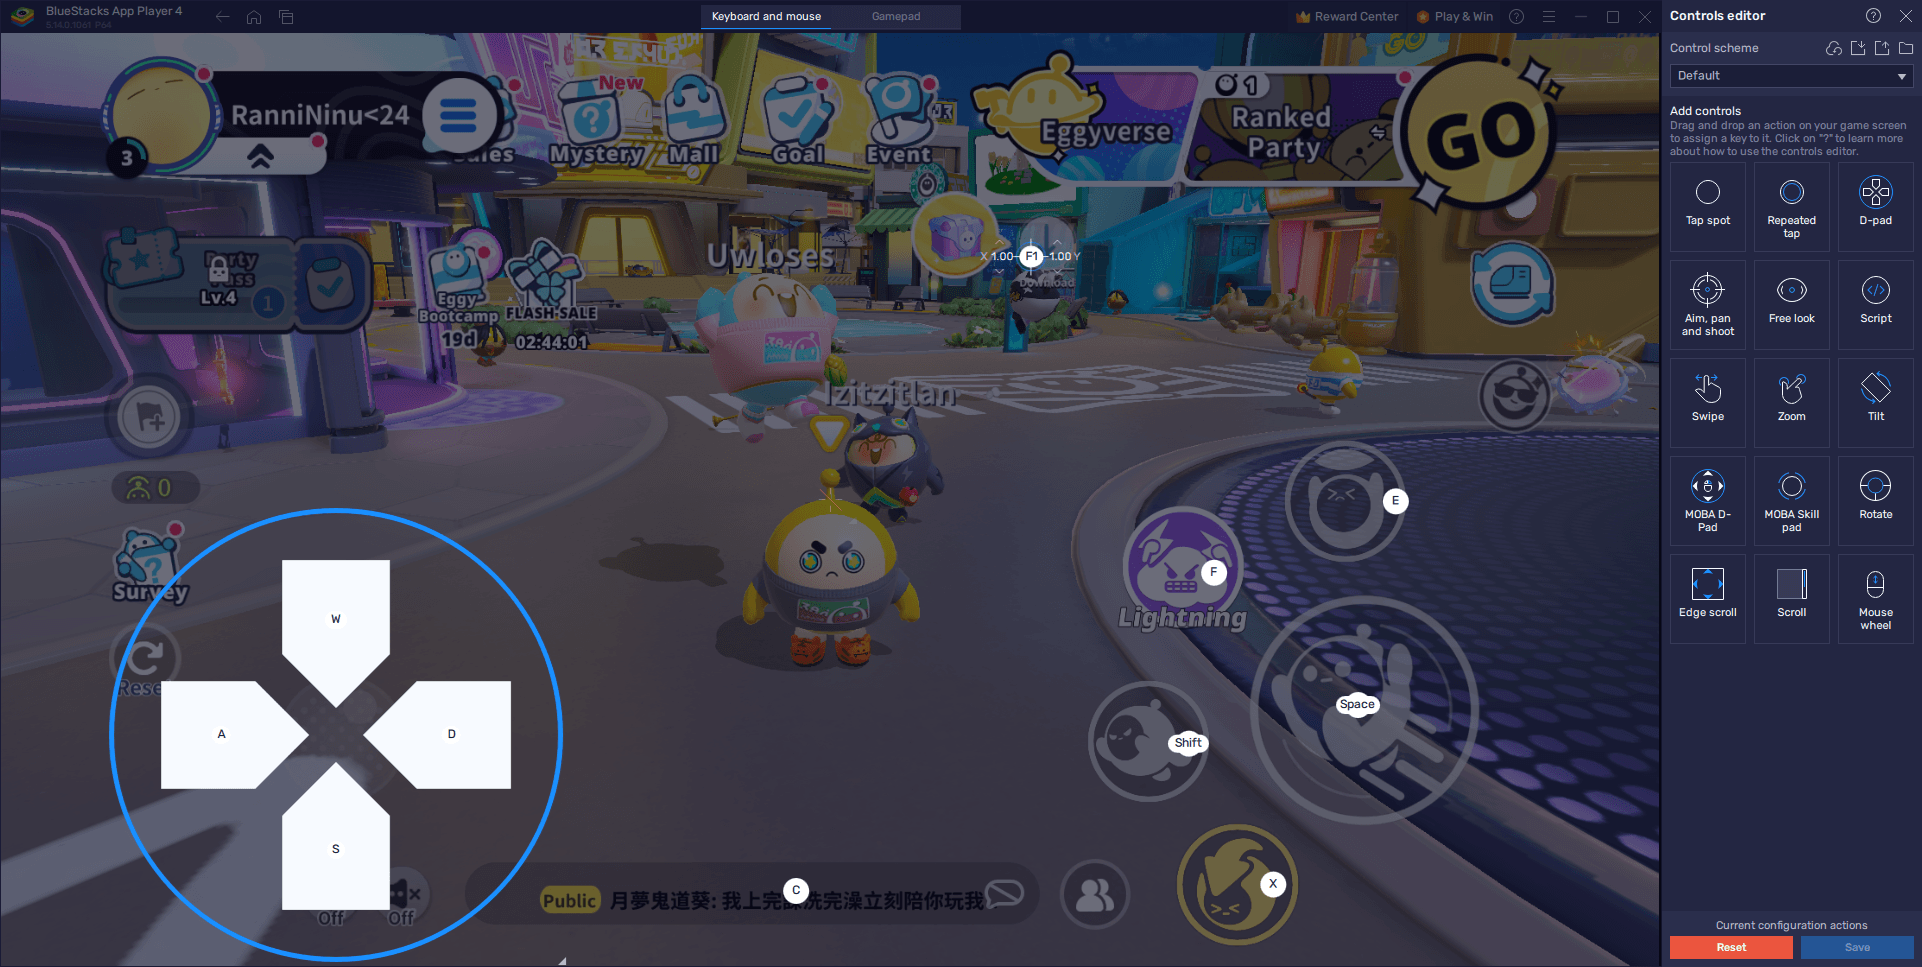 Win Big in Eggy Party on PC with BlueStacks - The Ultimate Features Guide